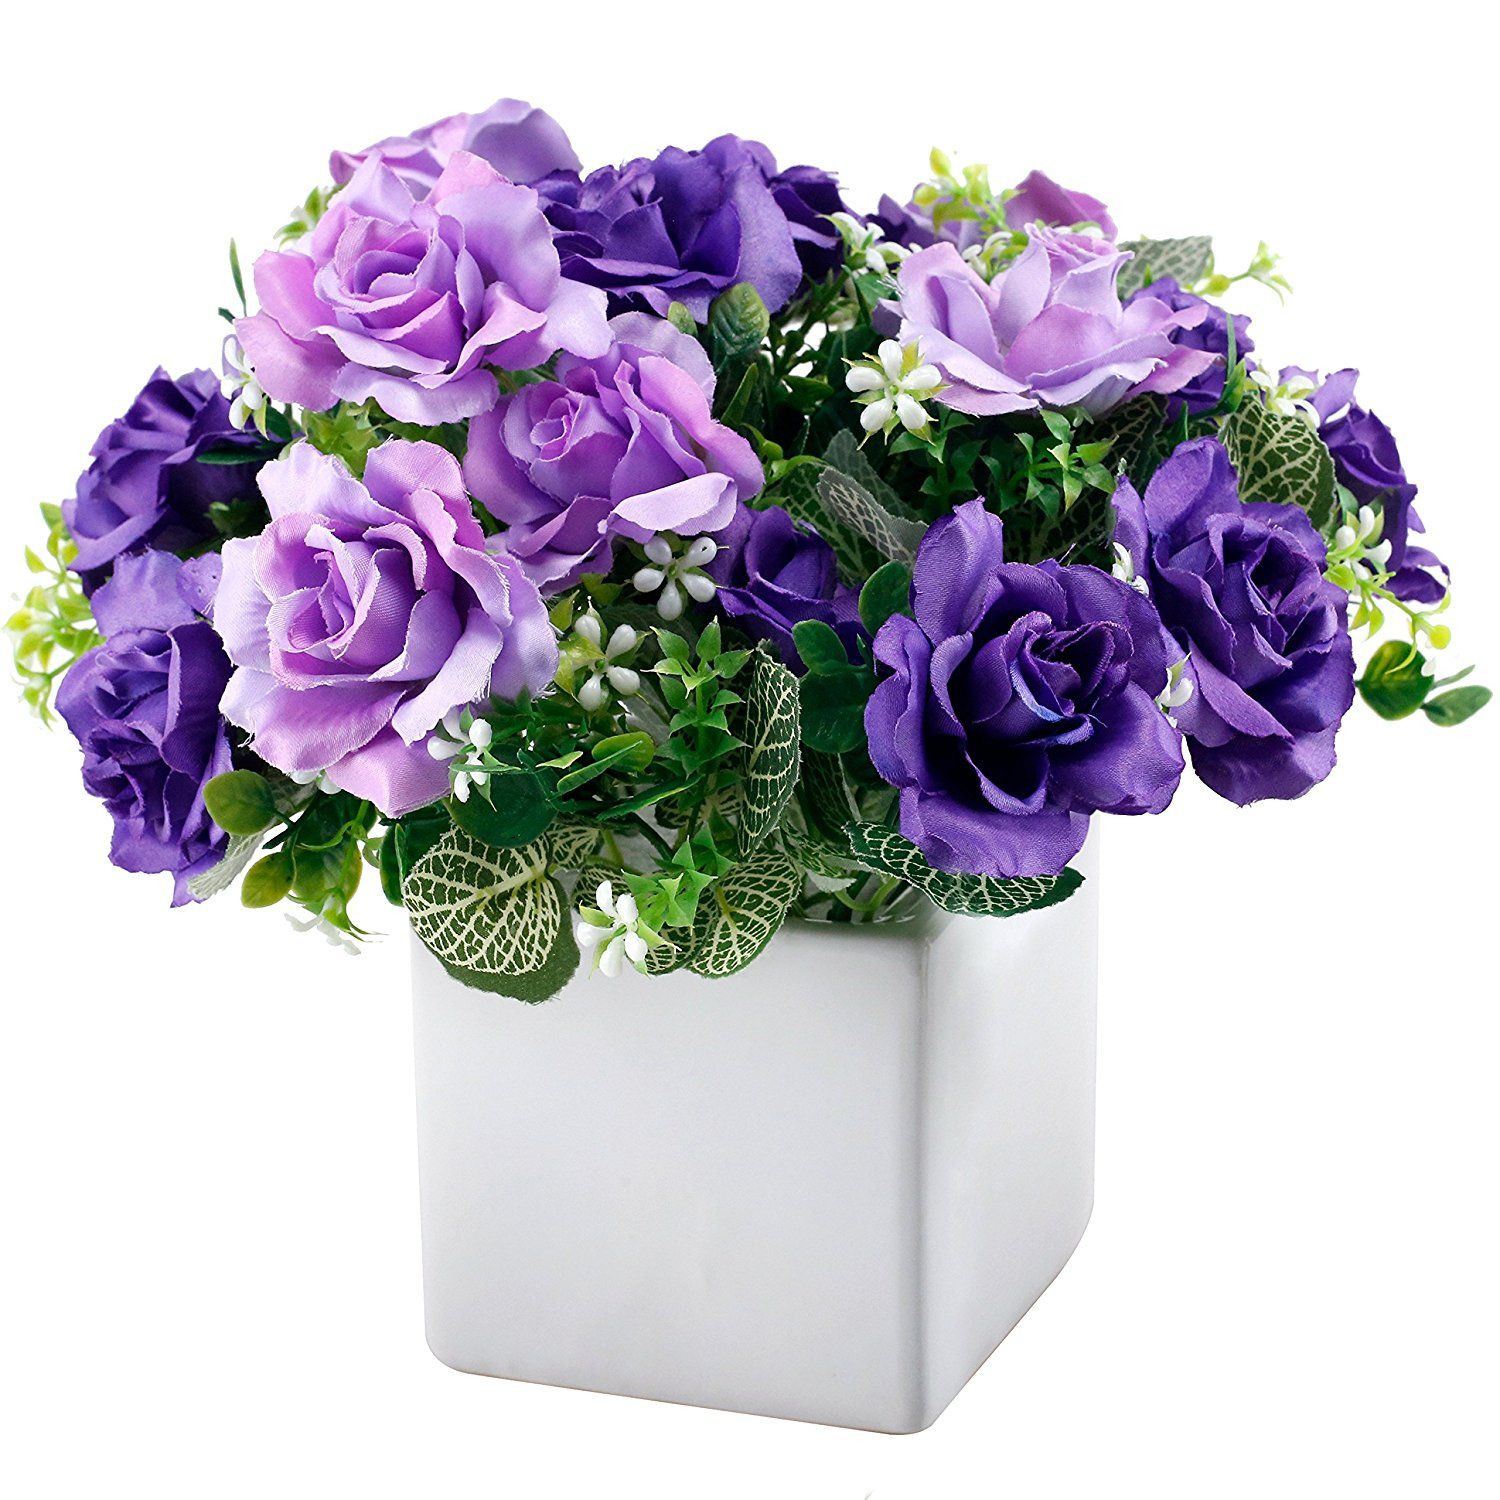 27 Awesome White Ceramic Wall Vase 2024 free download white ceramic wall vase of artificial purple rose flower arrangement in 4 inch square white regarding artificial purple rose flower arrangement in 4 inch square white ceramic vase learn